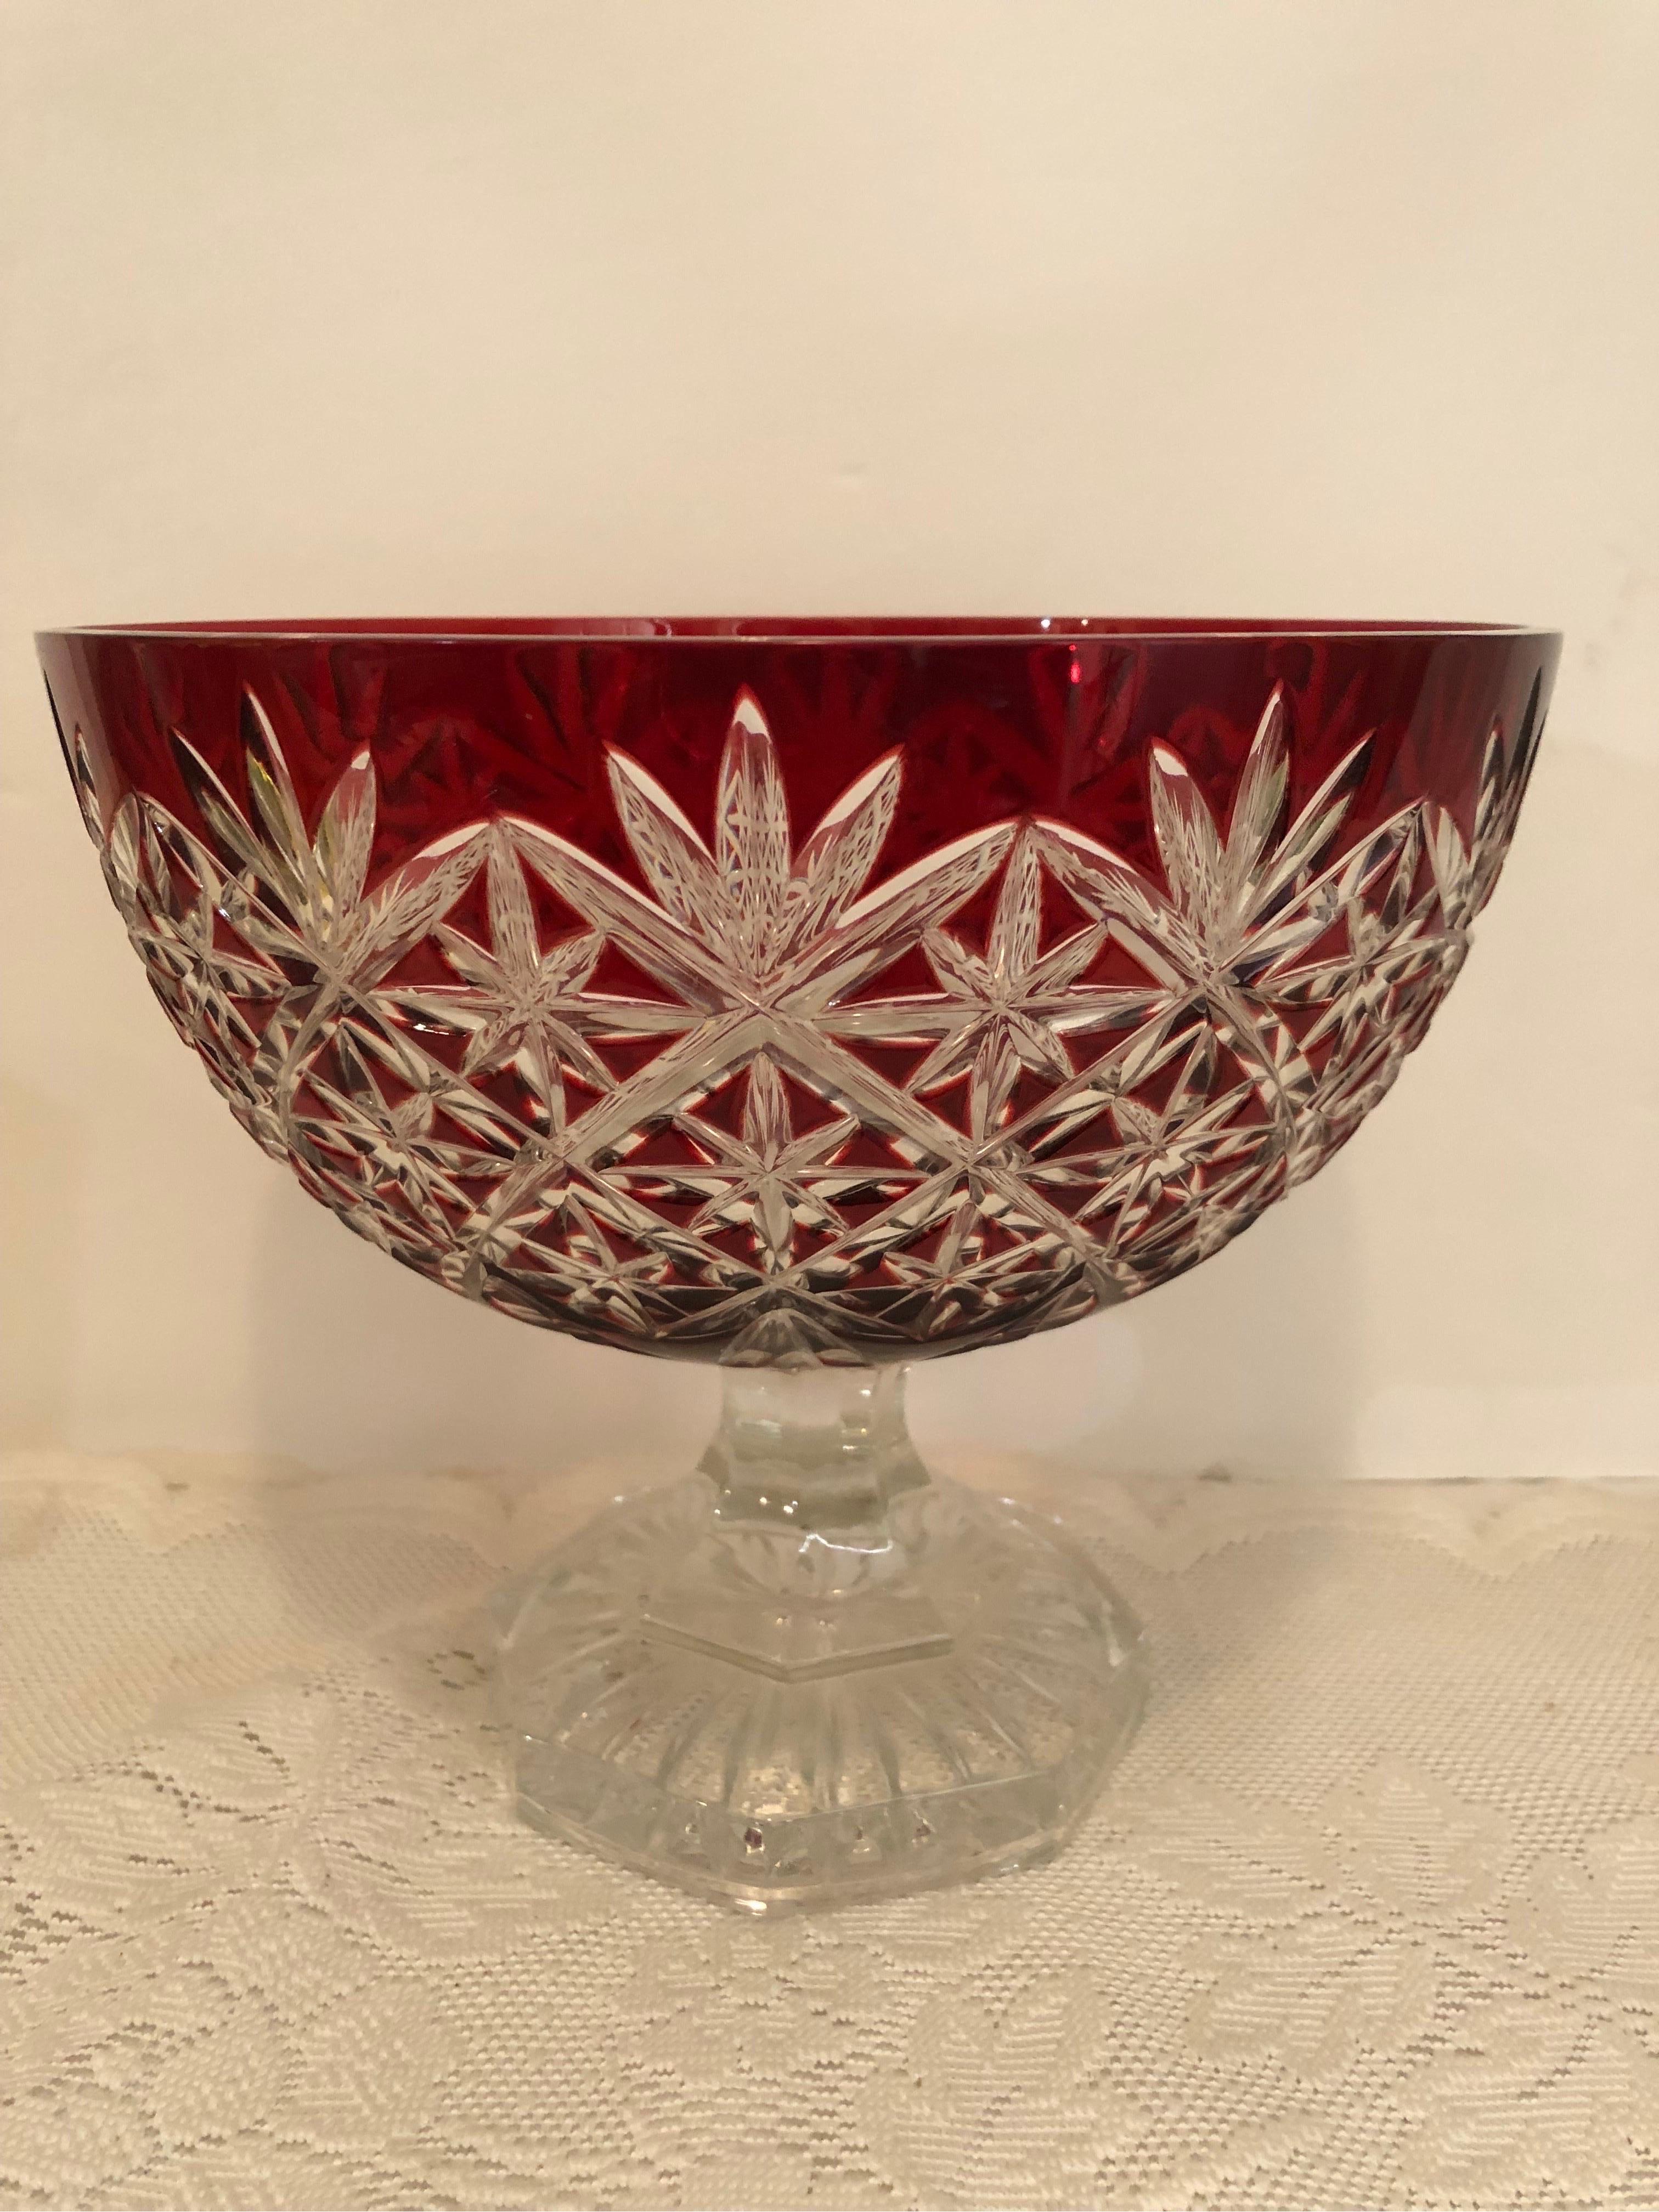 This is a spectacular ruby cut Bohemian Czechoslovakian centerpiece bowl on a clear-cut pedestal base. The main upper bowl is ruby red, and the base is clear cut crystal. It would make a stunning centerpiece bowl for the center of a table or as a